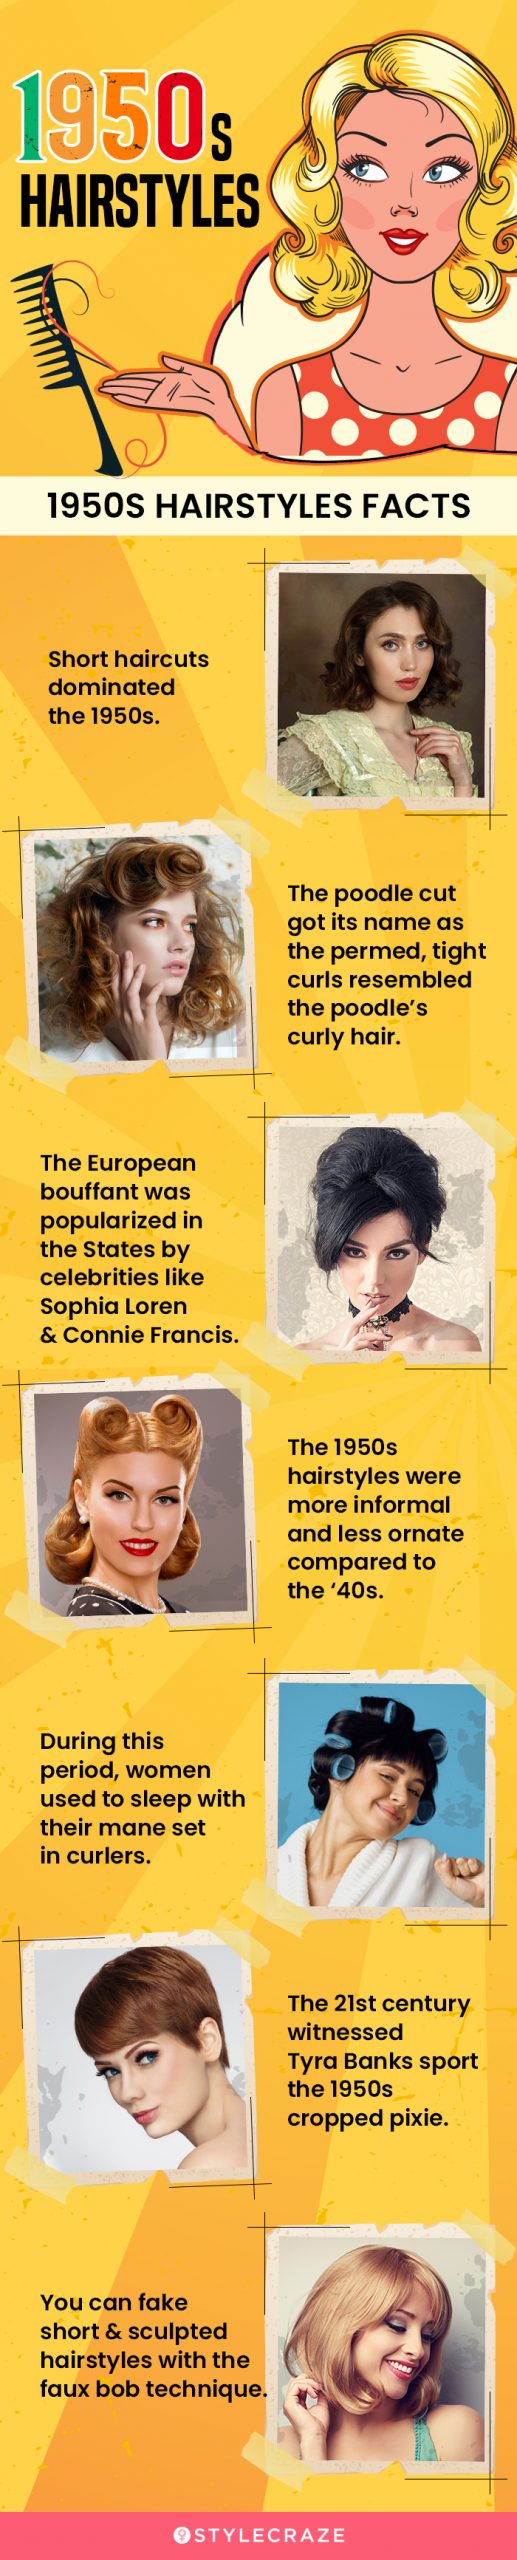 1950s hairstyles (infographic)